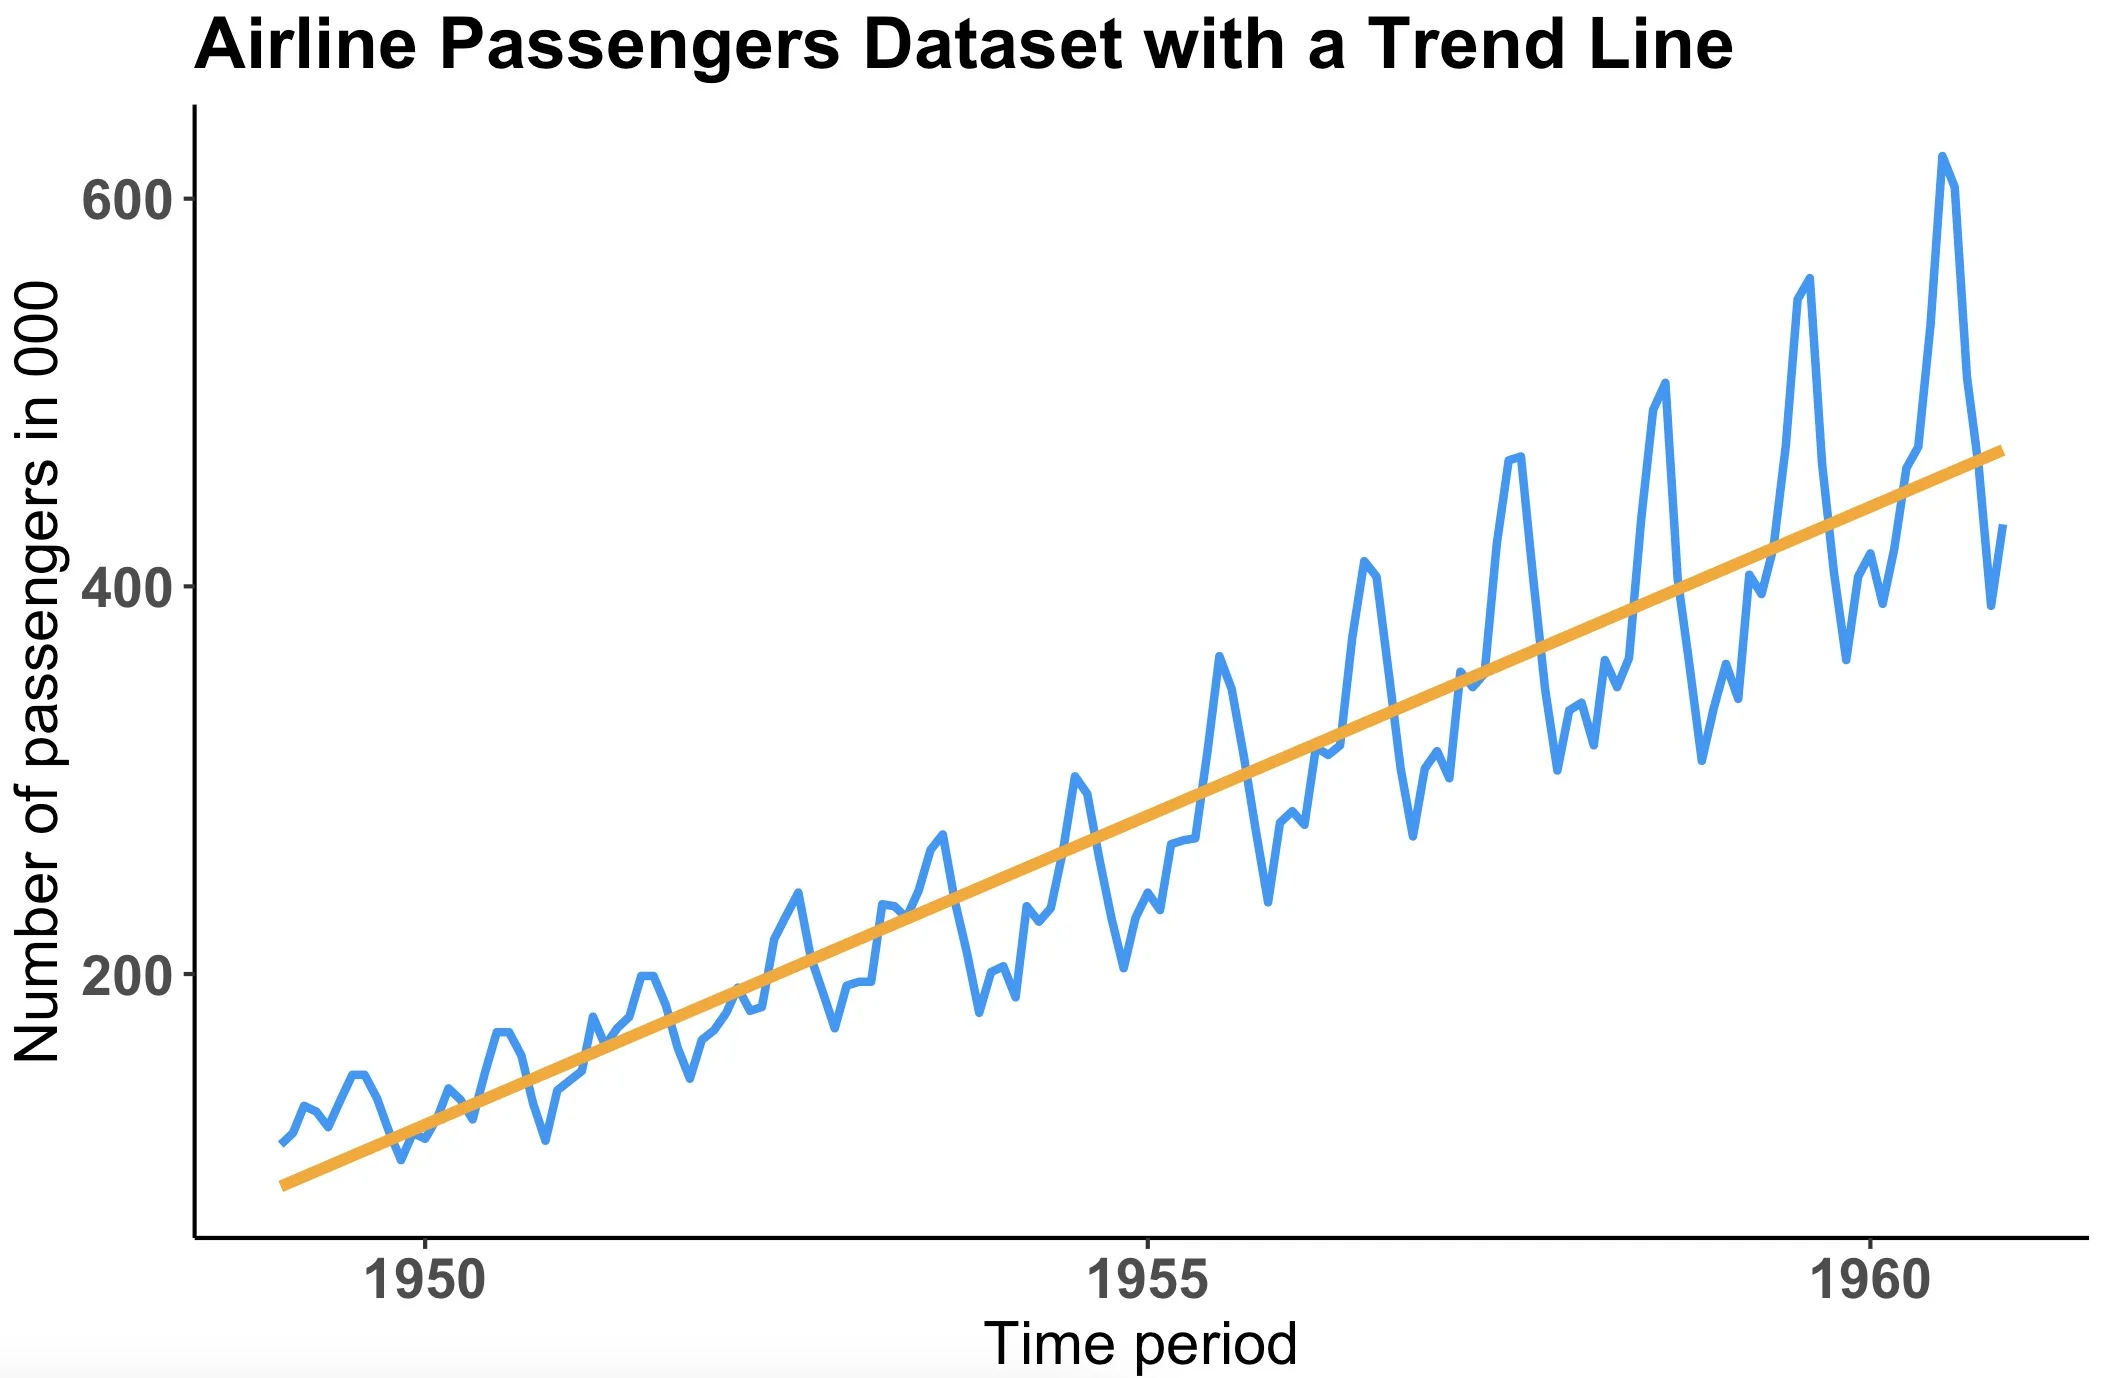 Image 16 - Visualized Airline passengers dataset with a trendline